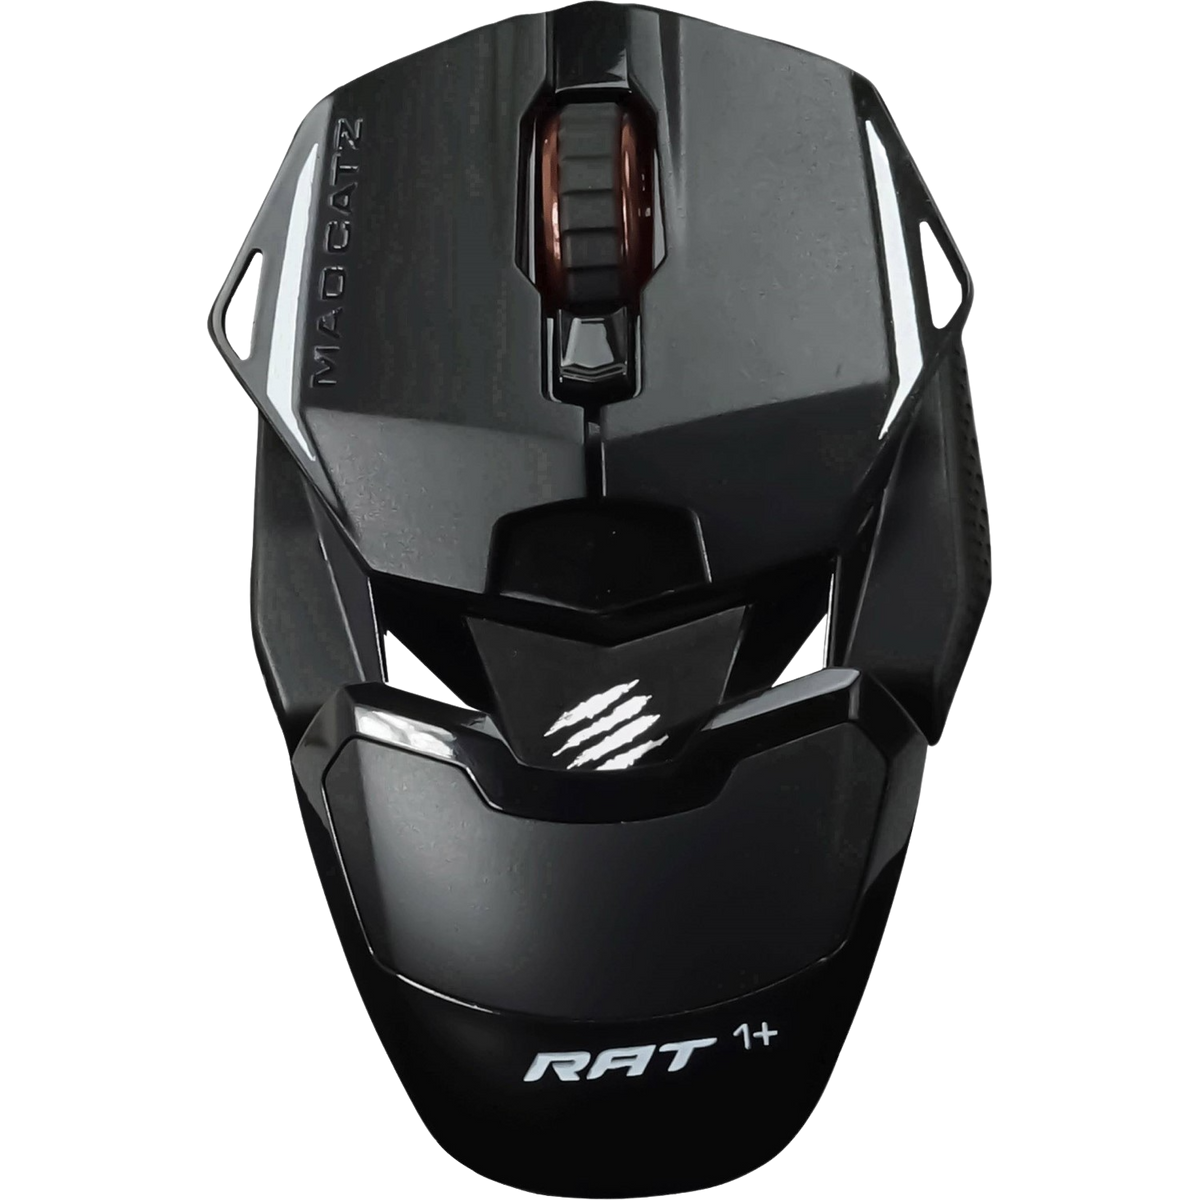 MAD CATZ MR01MCINBL000-0 R.A.T. 1+ GAMING Schwarz OPTICAL Gaming MOUSE, Maus, BL